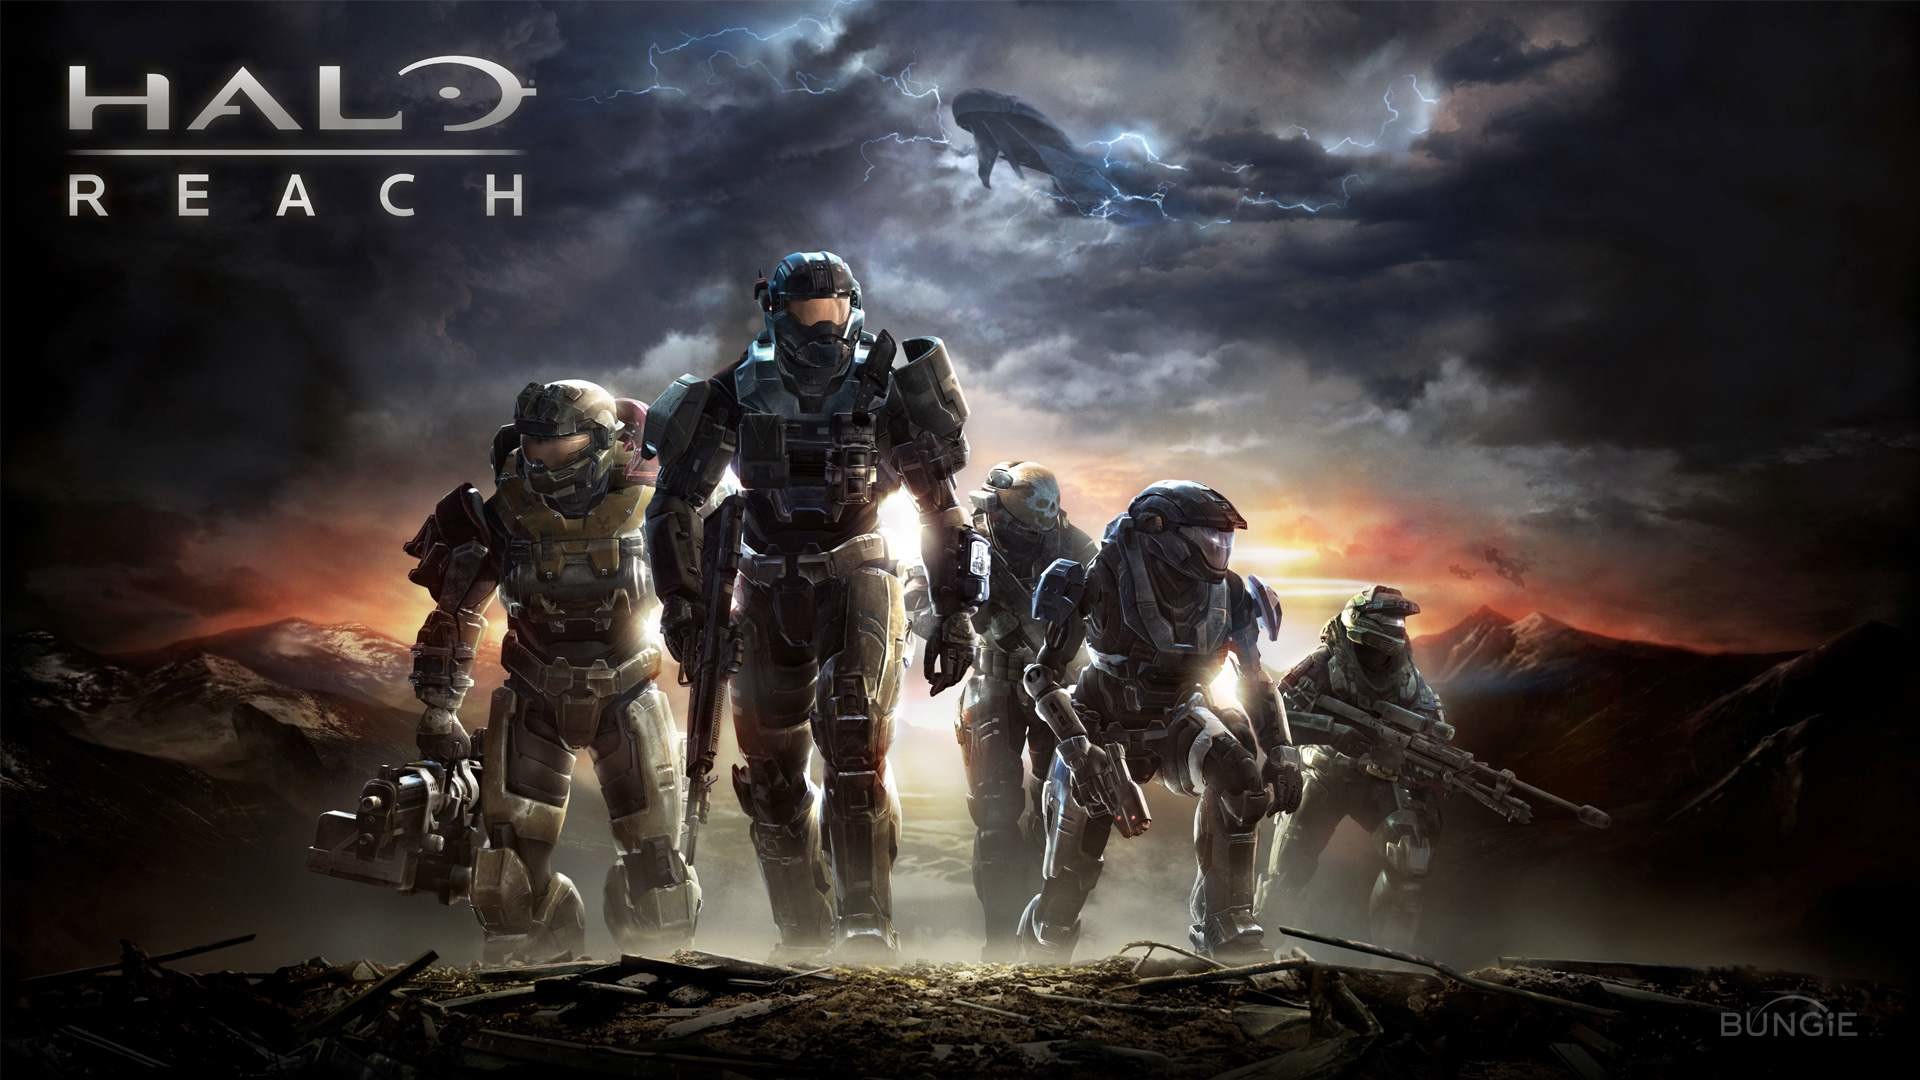 1920x1080 Halo Reach Wallpapers in HD